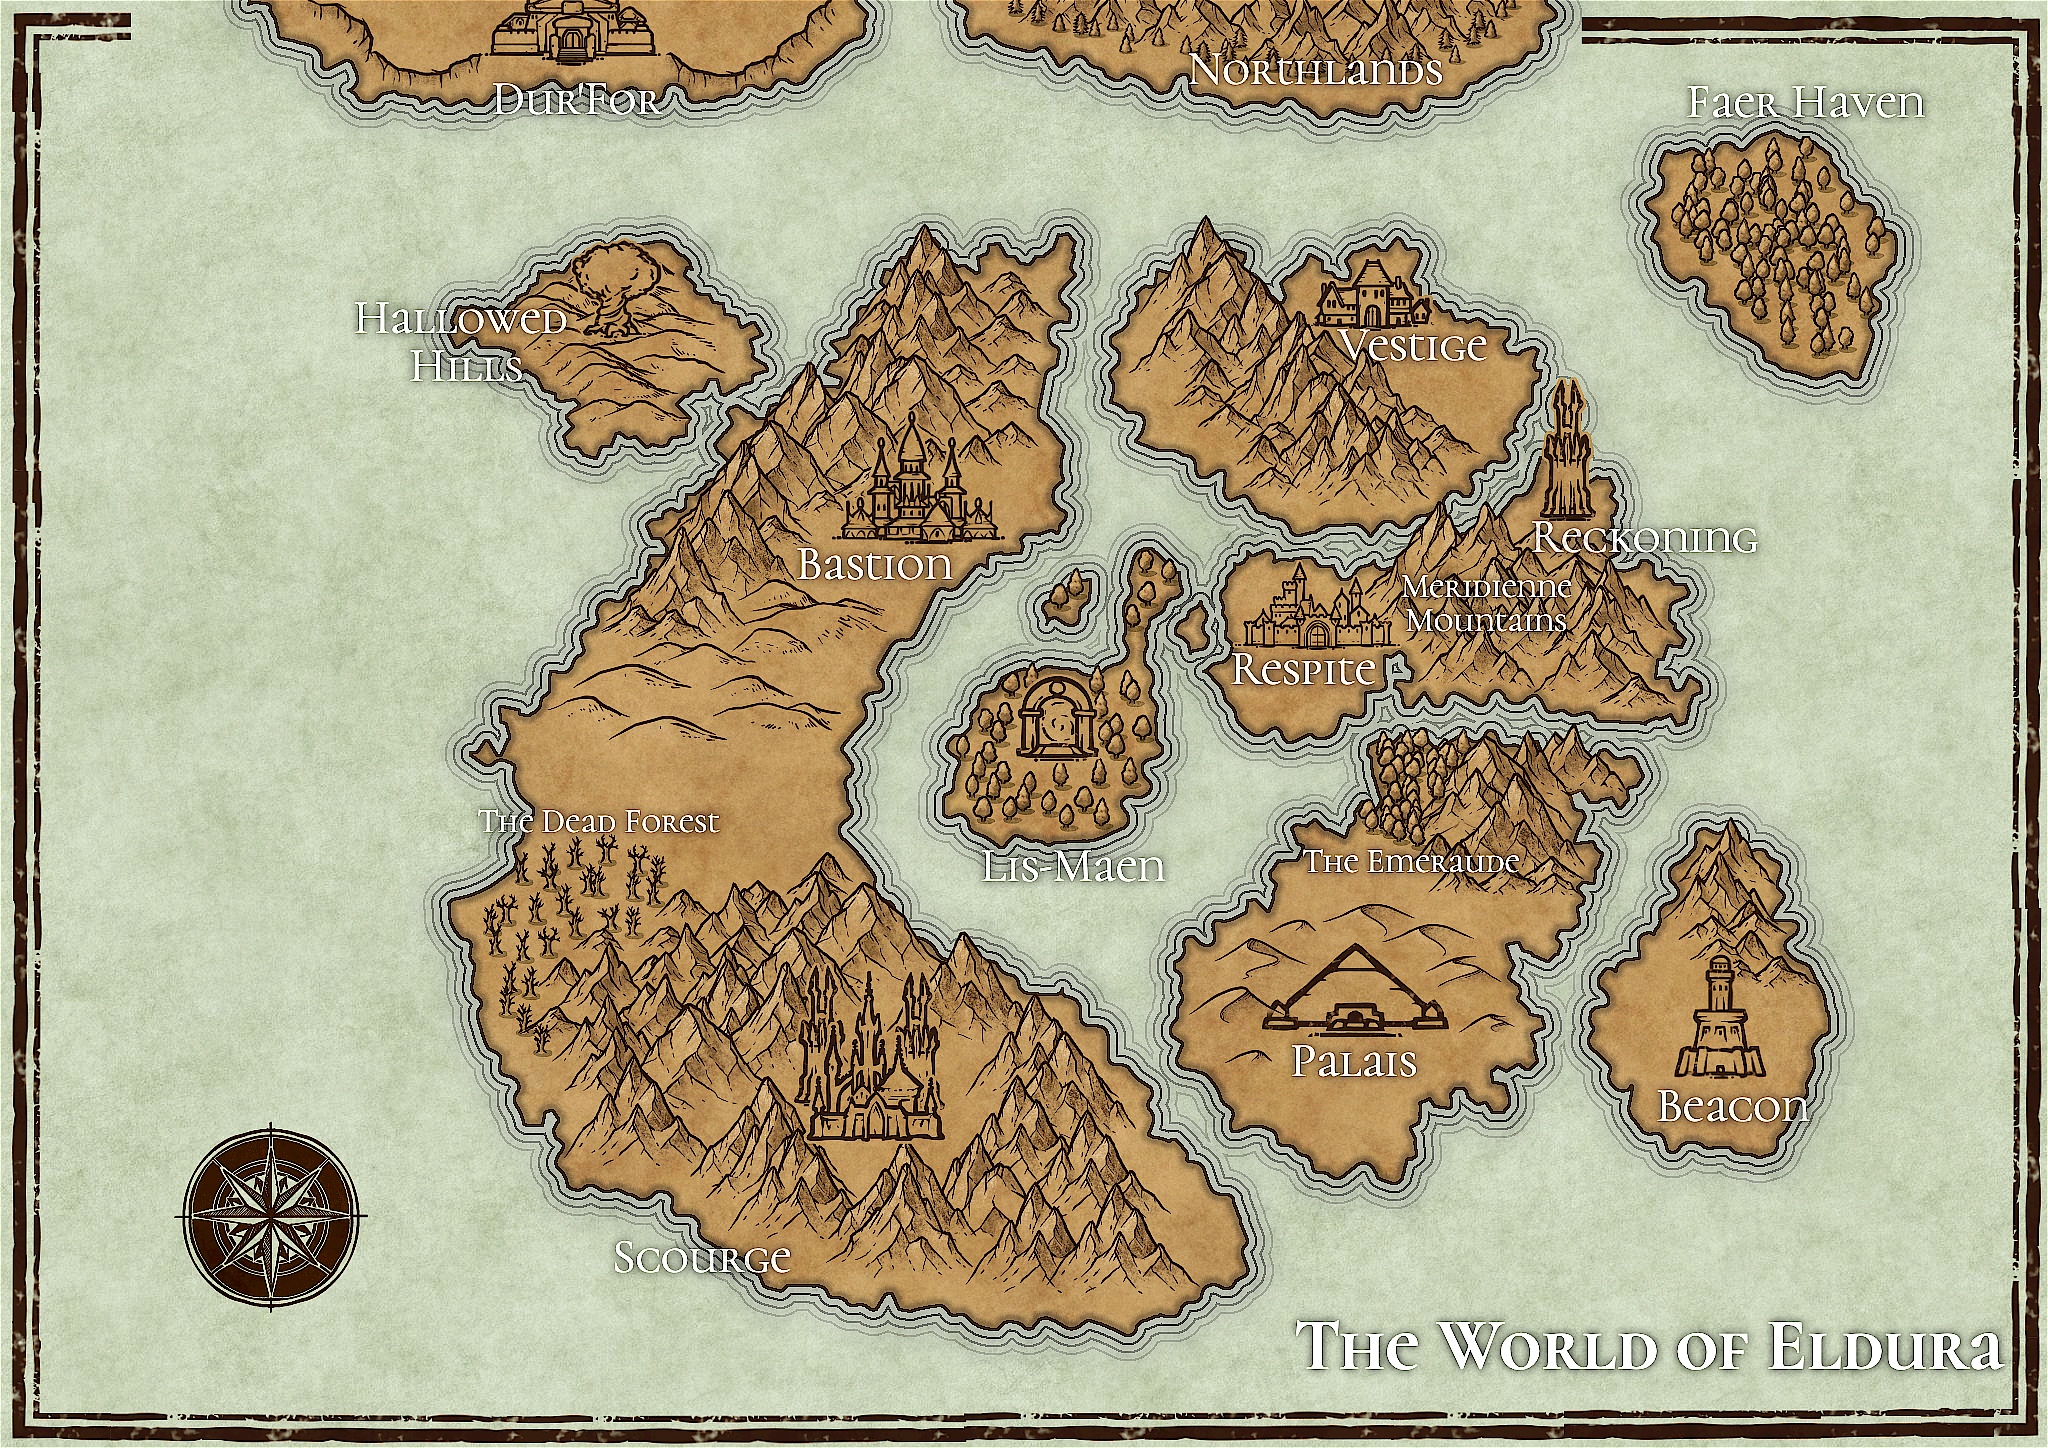 picture of a fantasy world map for the world of Eldura